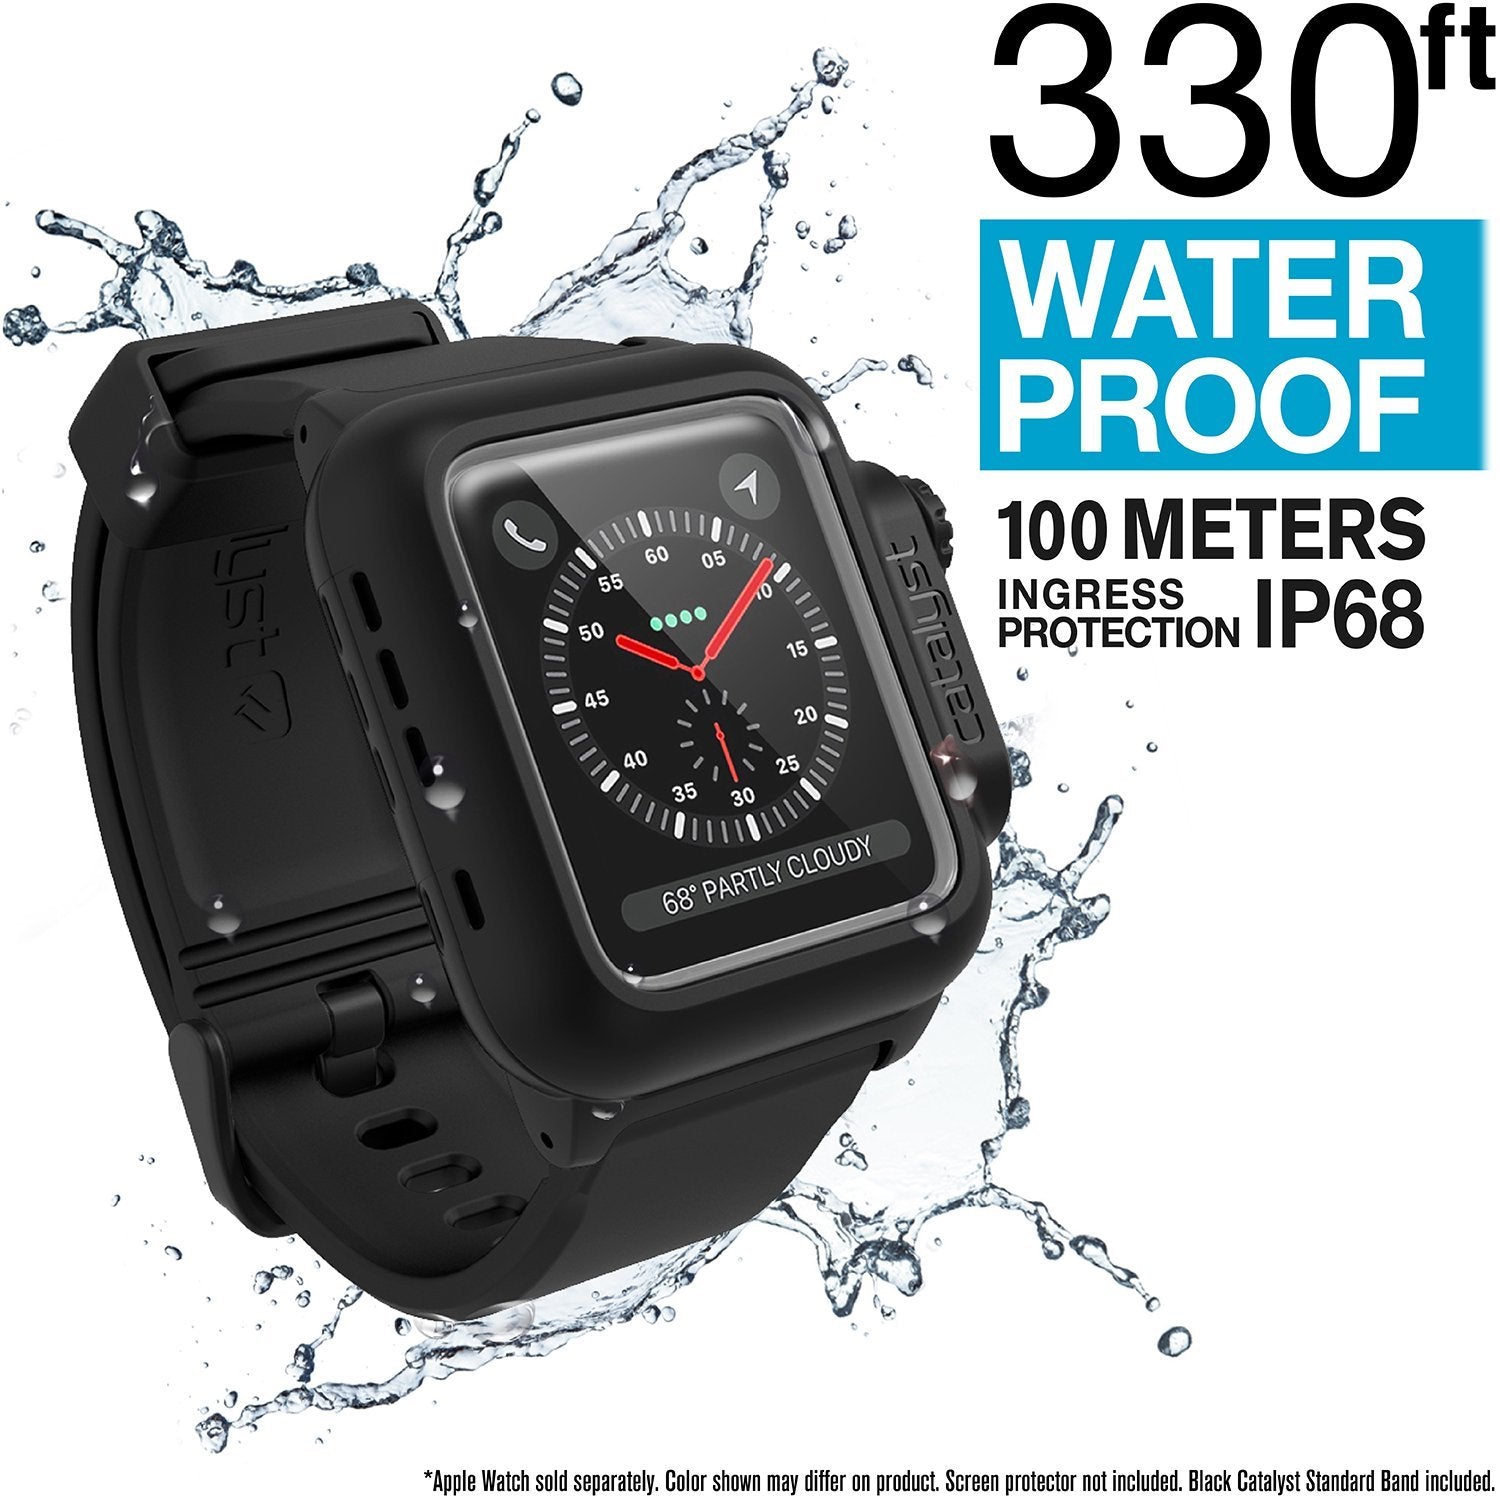 catalyst apple watch series 3 42mm waterproof case band showing the catalyst case with apple watch and splashes of water text reads 330ft waterproof 100 meters ingress protection ip68